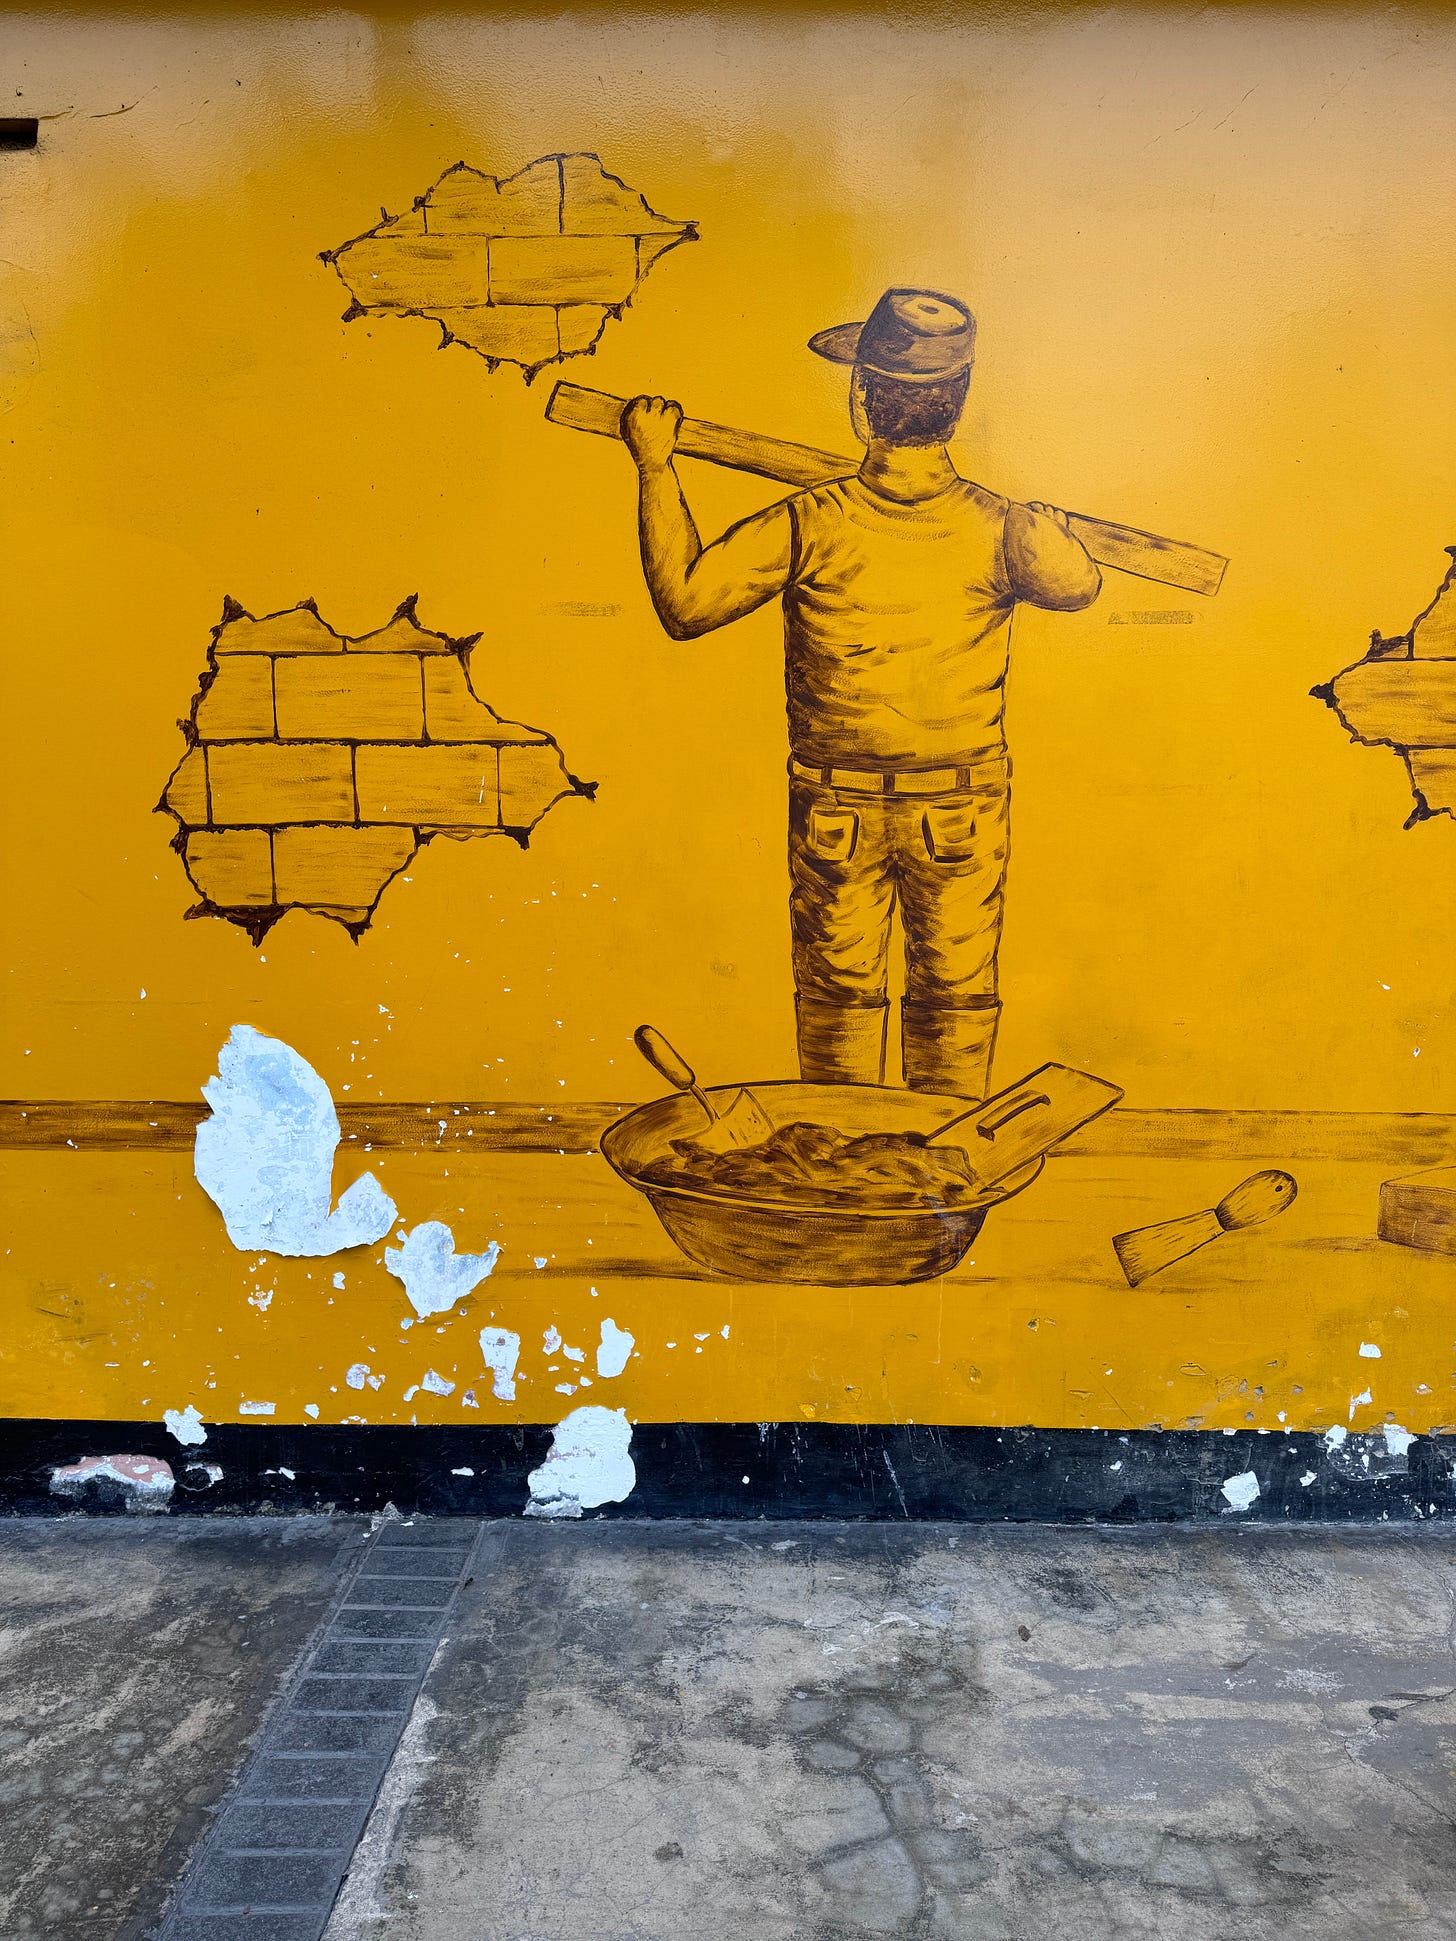 Street art of a construction worker painting over bricks on a yellow wall in Lima, Peru